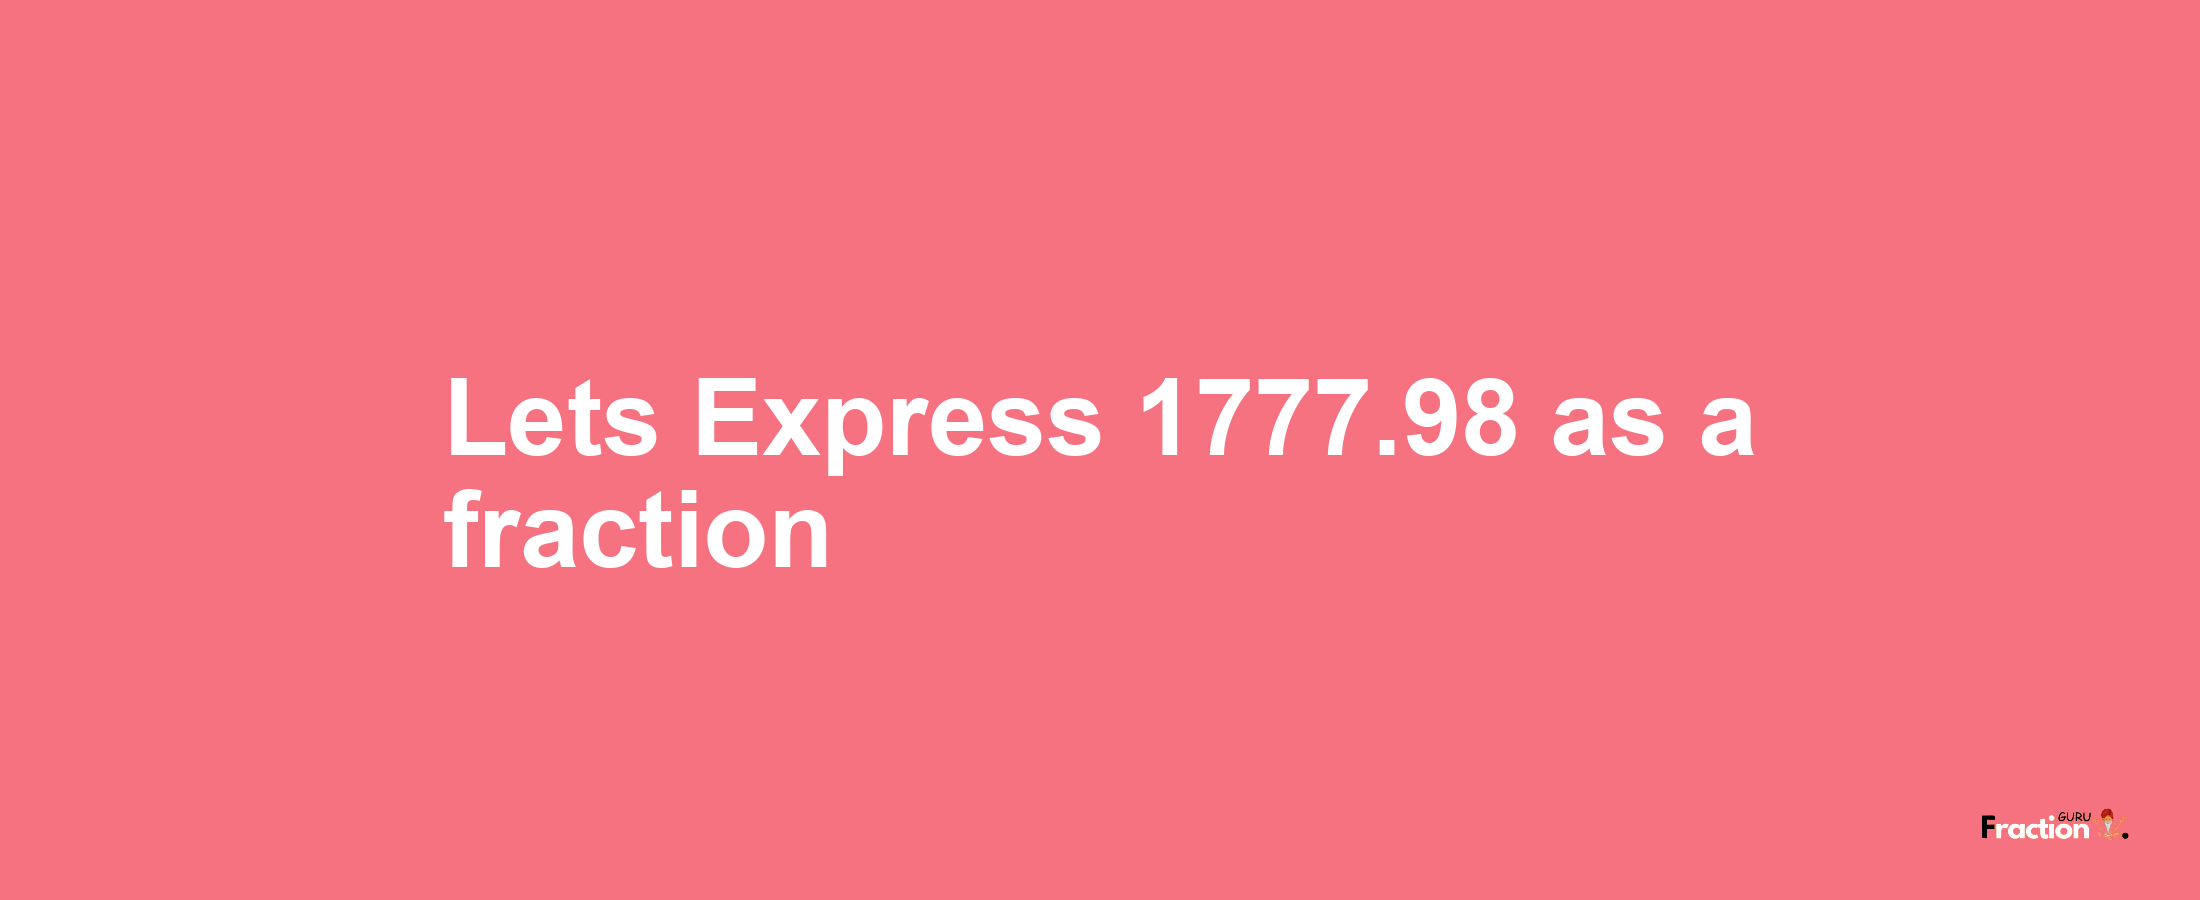 Lets Express 1777.98 as afraction